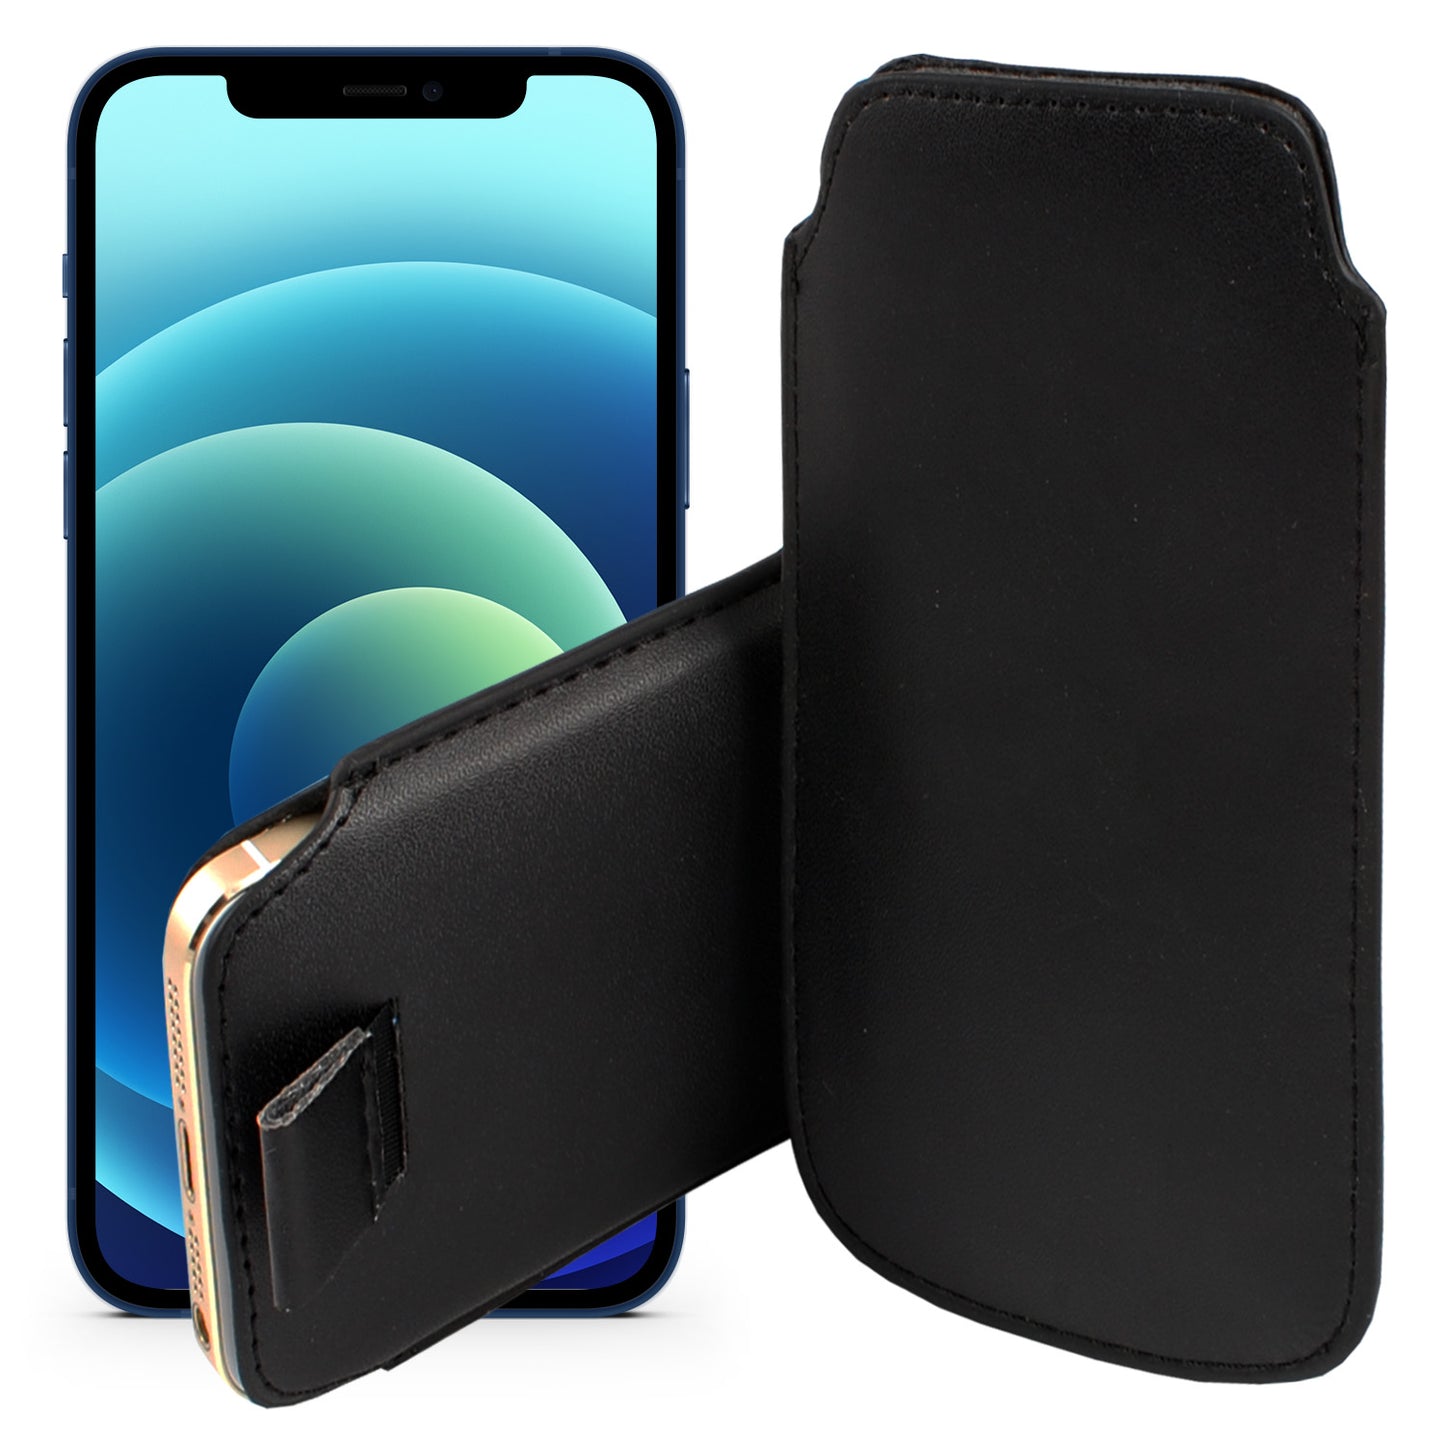 MEZON Apple iPhone 12 Pro Max (6.7") Pull Tab Slim Faux Leather Pouch Sleeve Case – Shock Absorption – Black